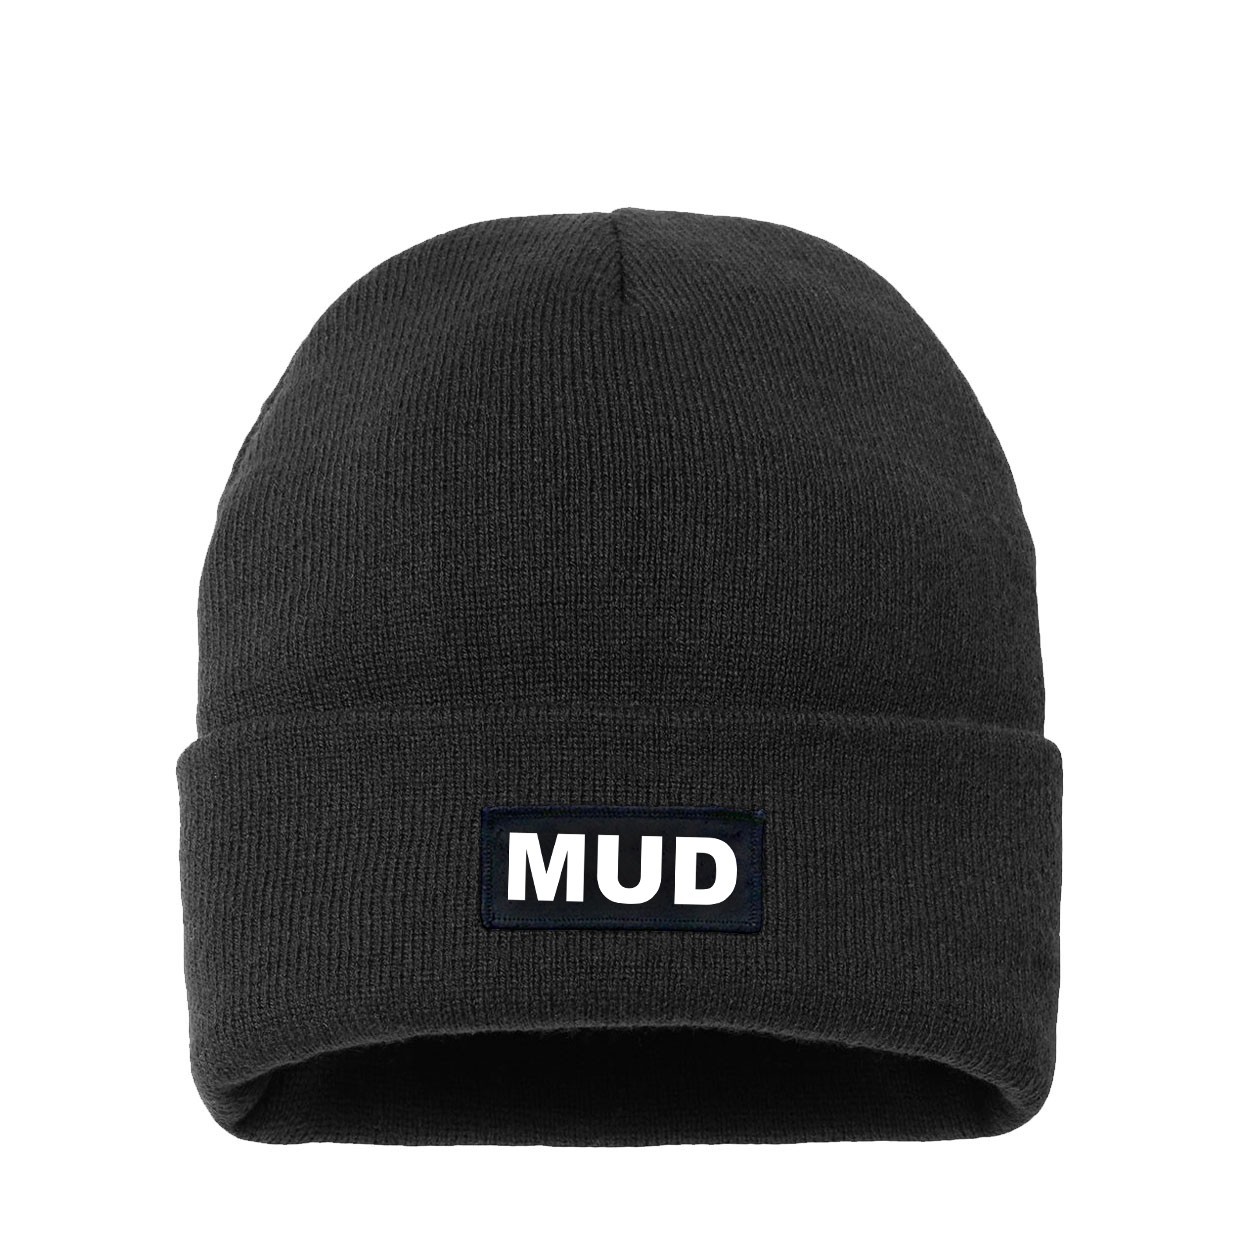 Mud Brand Logo Night Out Woven Patch Night Out Sherpa Lined Cuffed Beanie Black